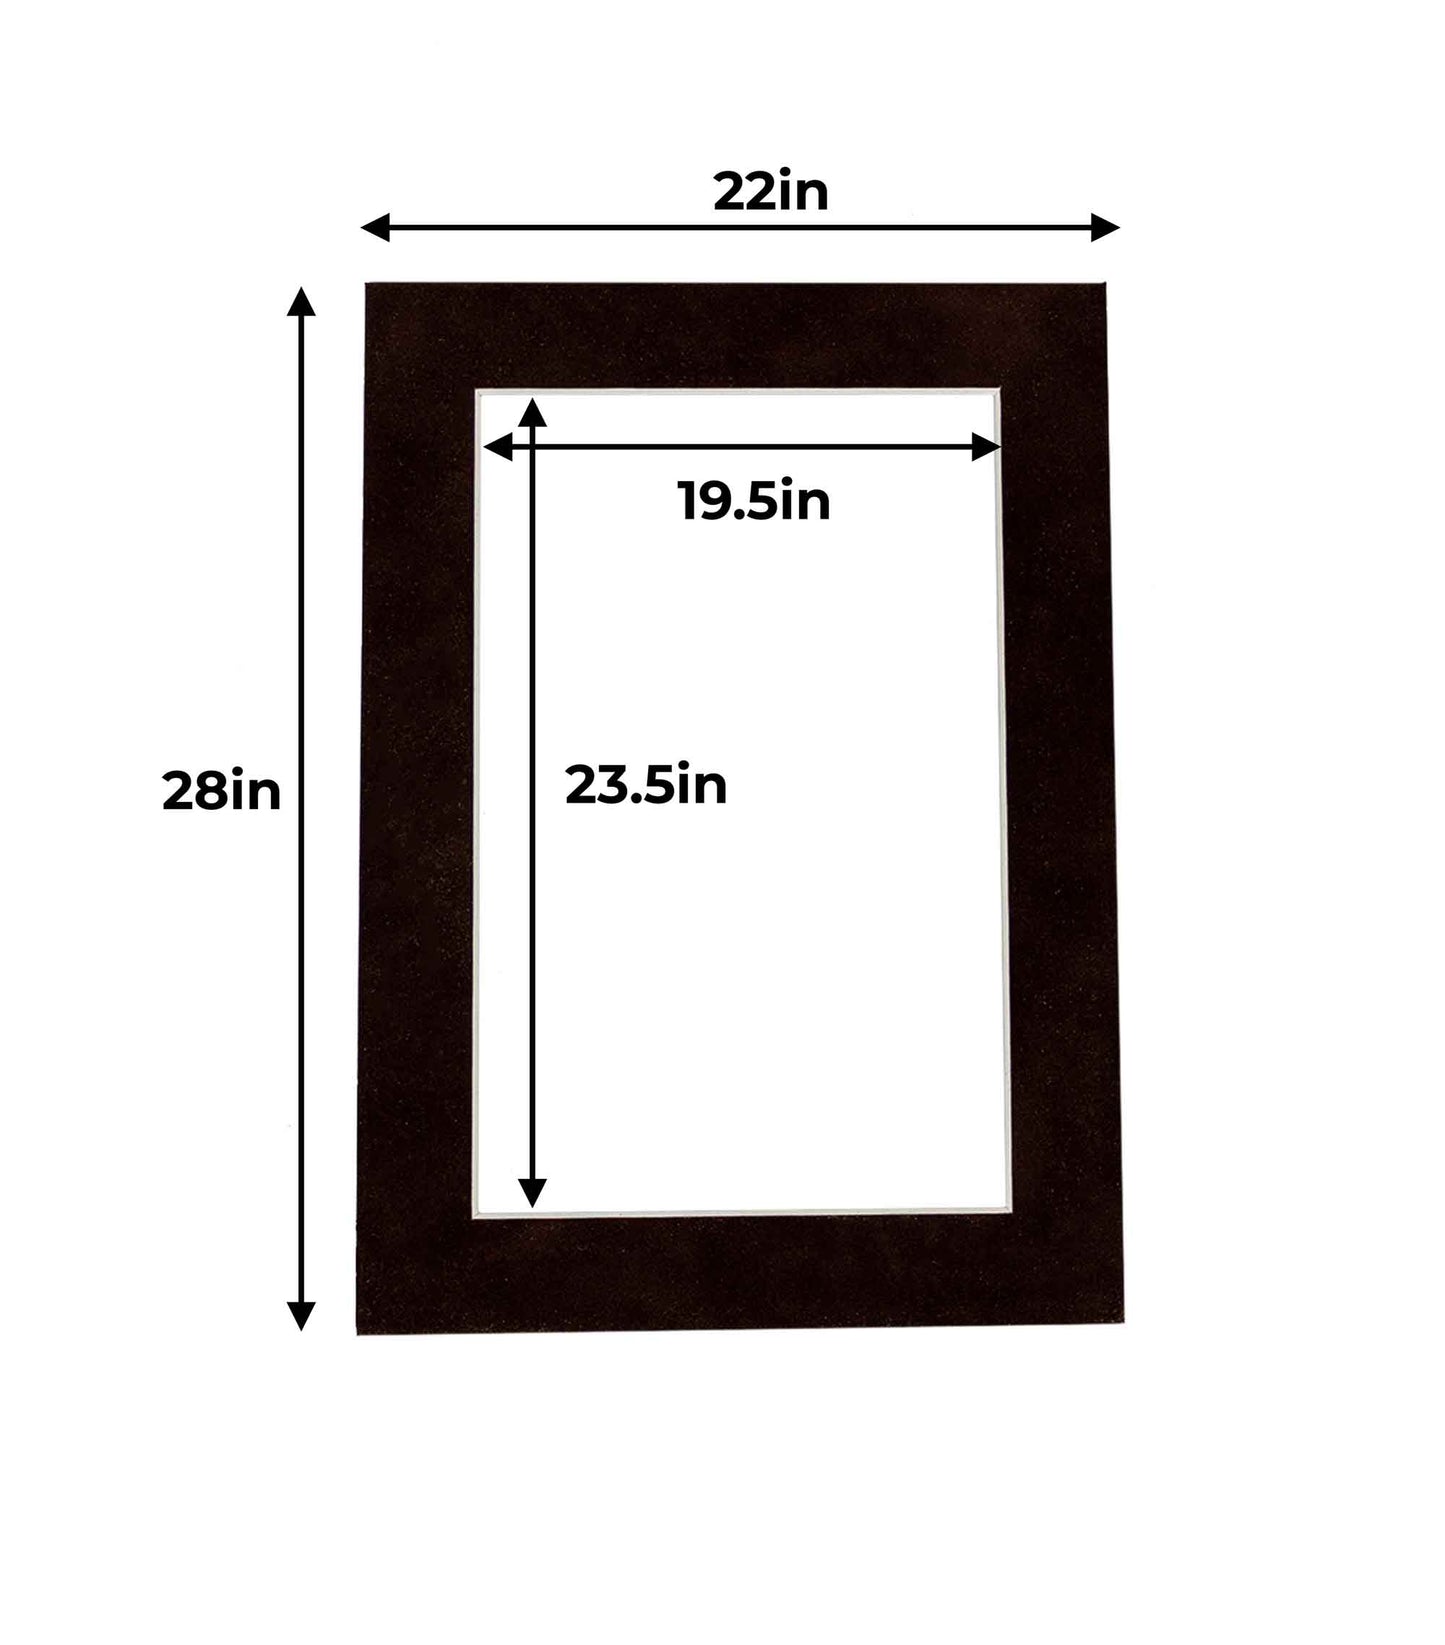 Brown Suede Precut Acid-Free Matboard Set with Clear Bag & Backing